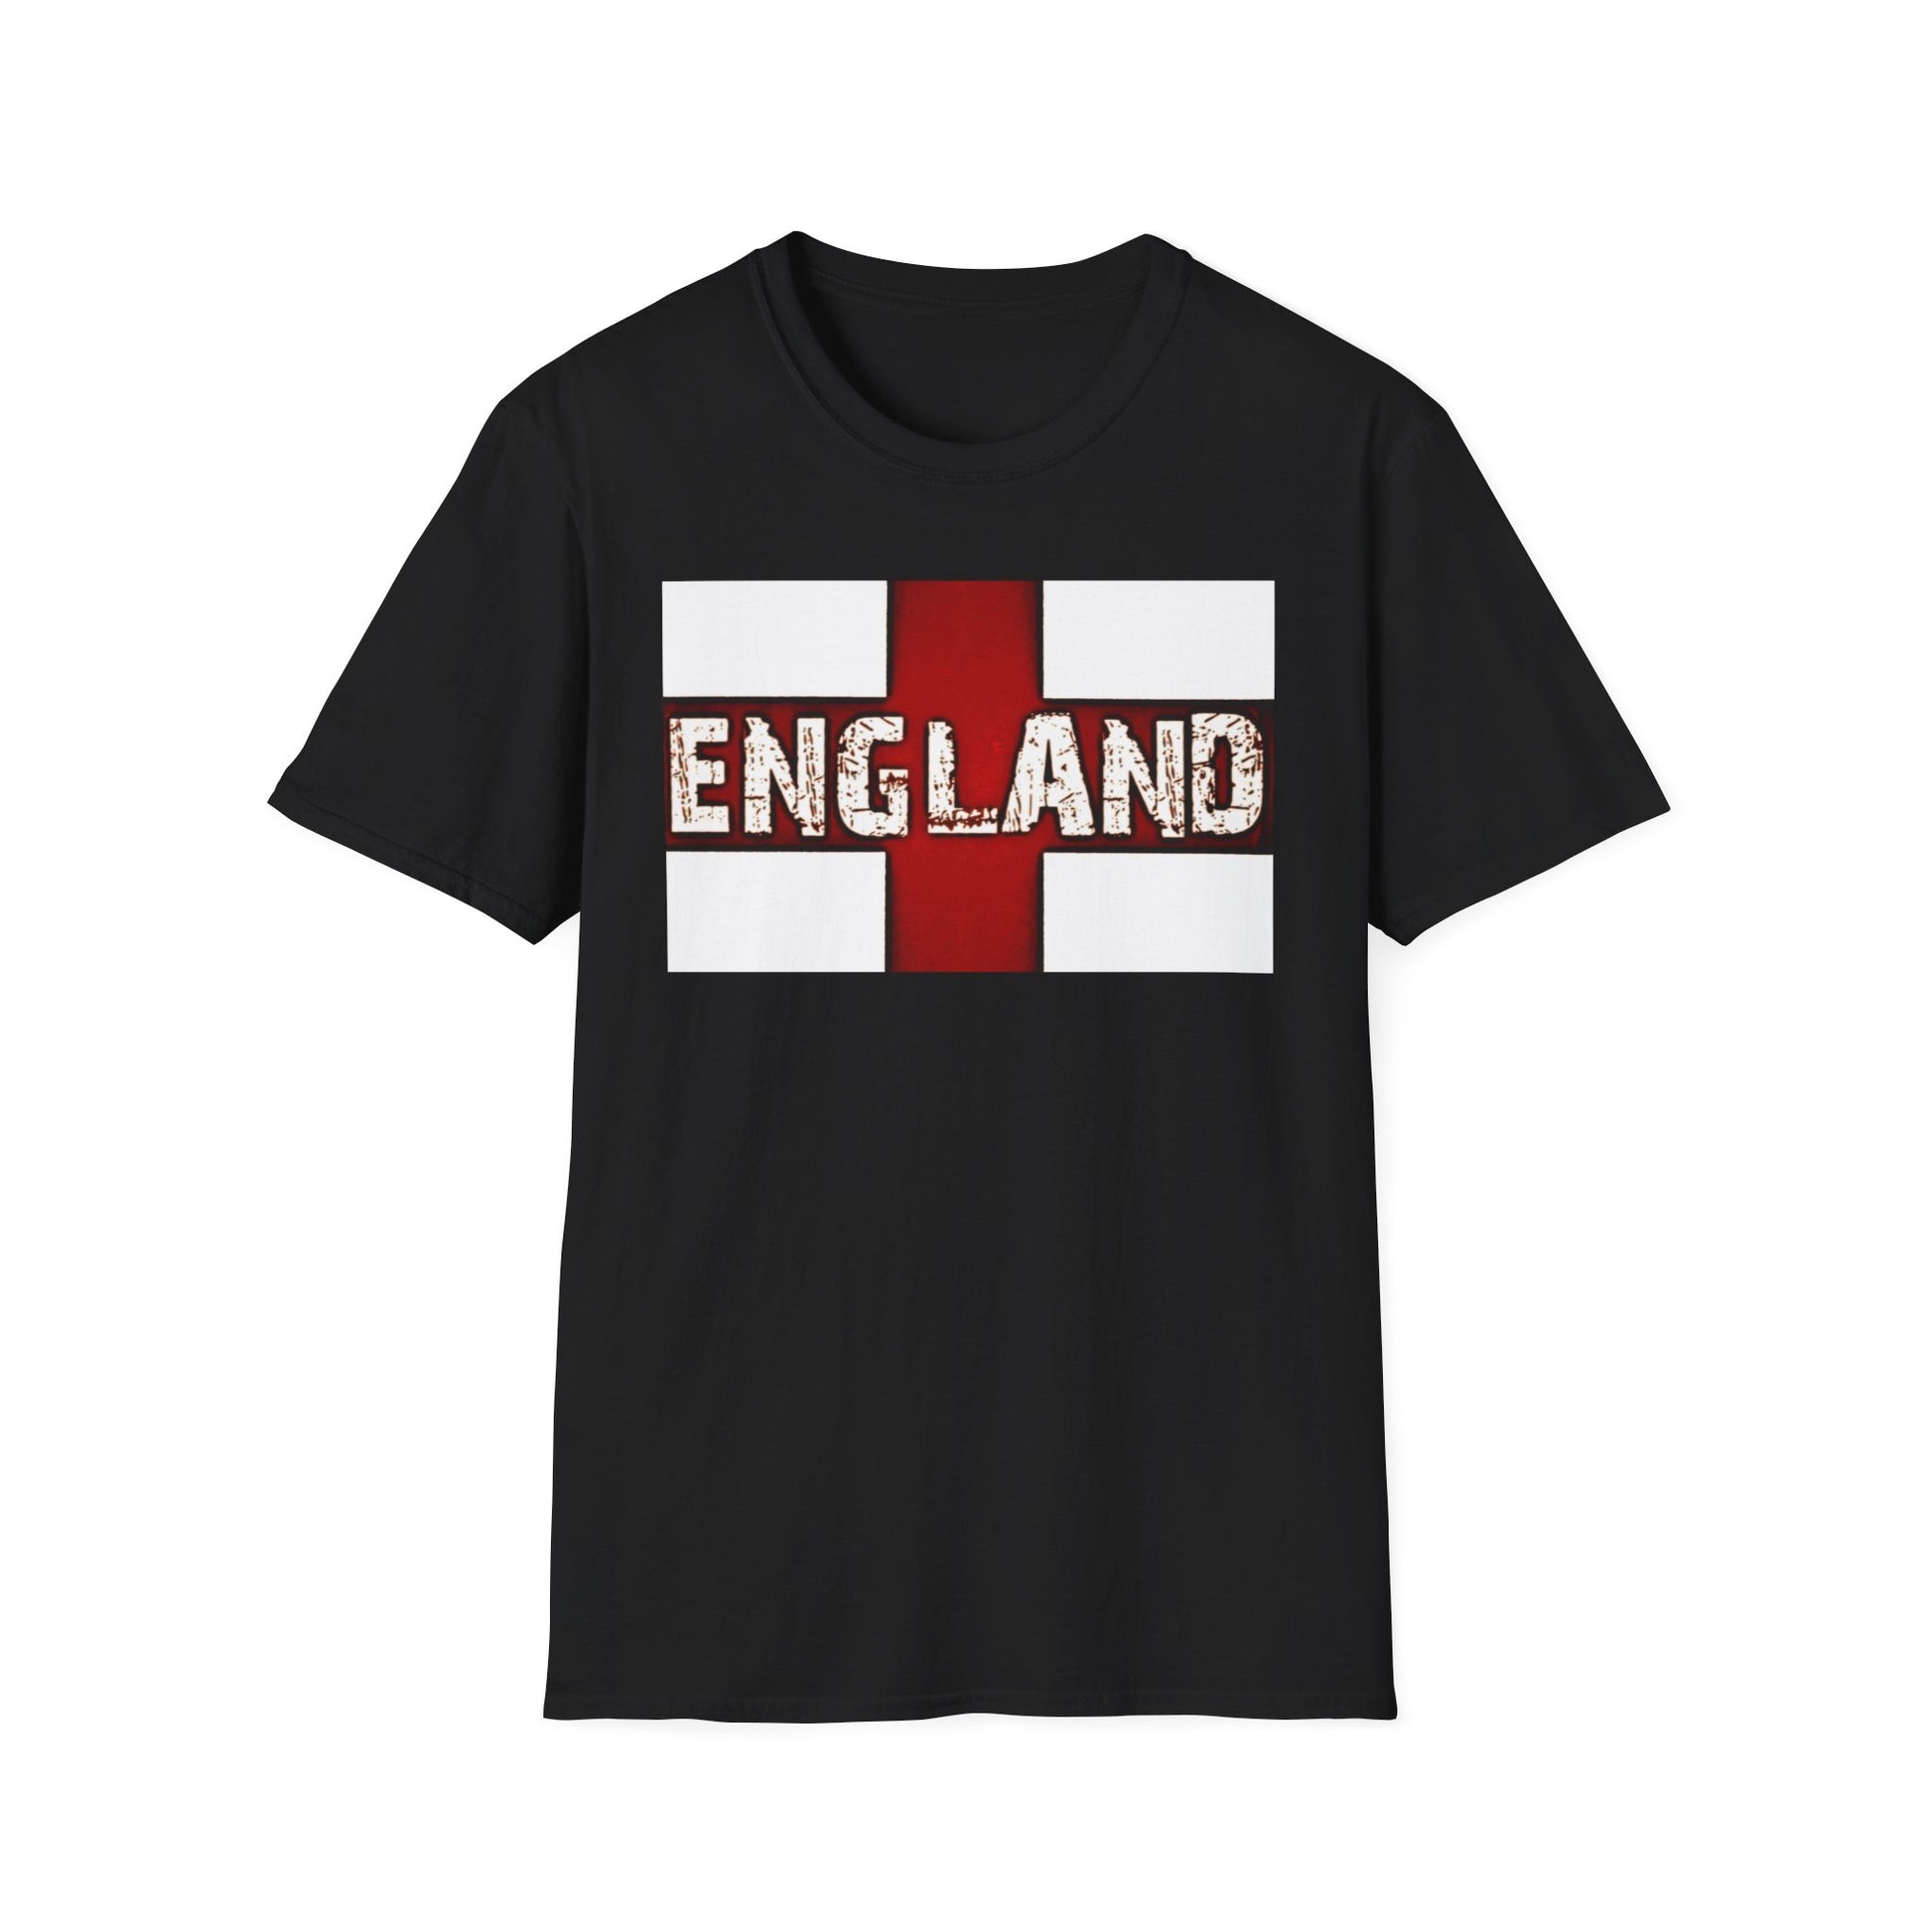 A black t-shirt with a design of the English flag and the word England going across the middle